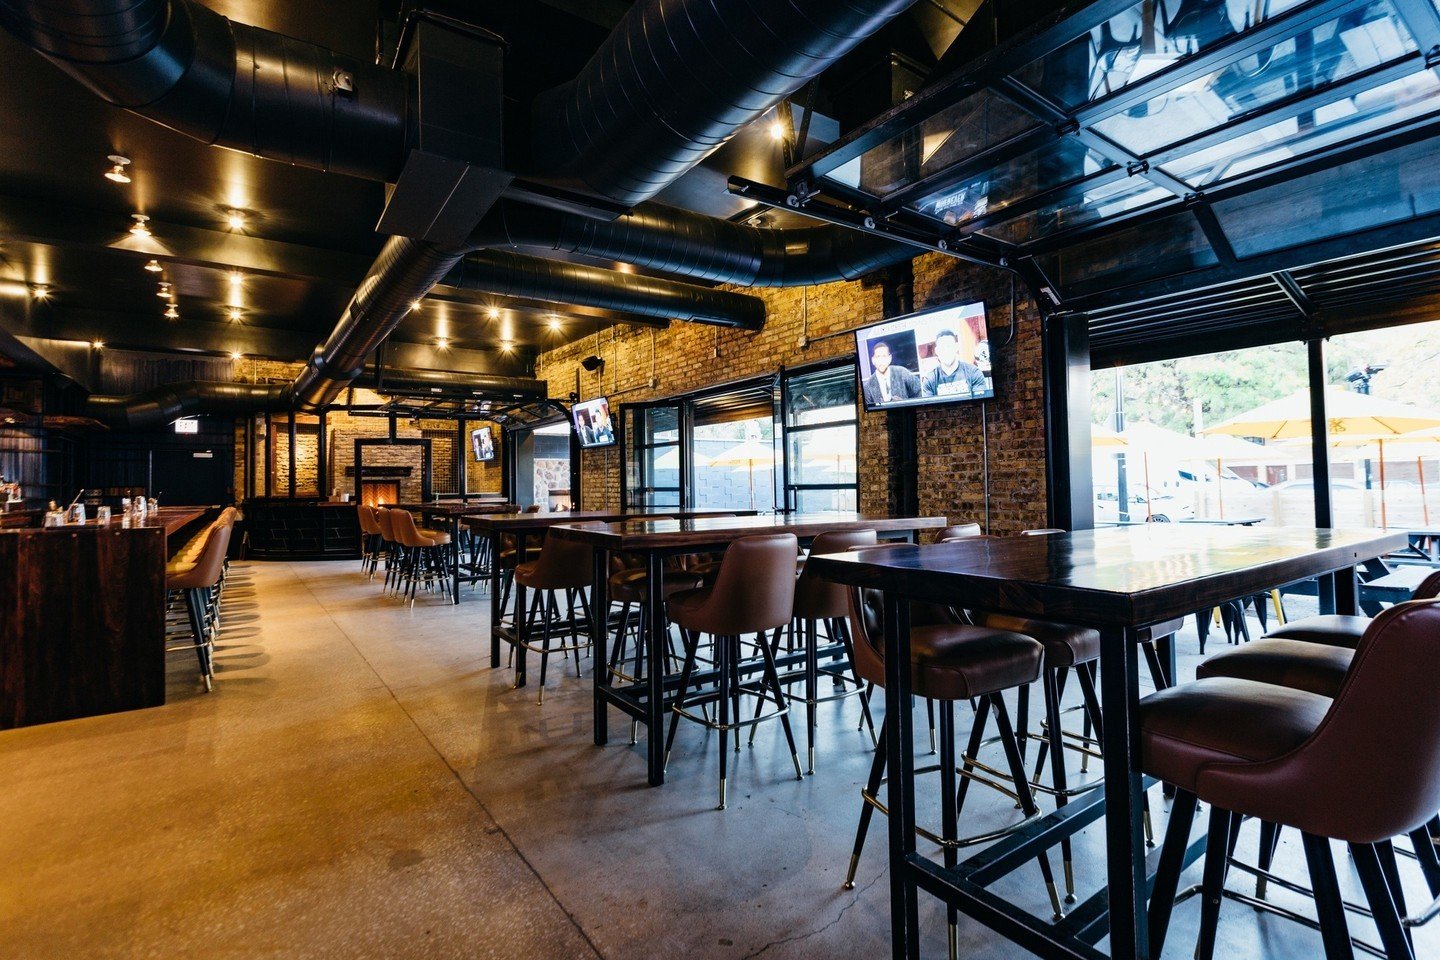 Cubs game is on at 6:10pm and the Sox at 6:40! The garage doors are open, patio walls are off, and the sun is shining! Come on out for a drink and some tasty food. We're open 3pm-1am. We&rsquo;ll see you soon!⁠
📷: Jude Goergen⁠
⁠
#logansquare #burge